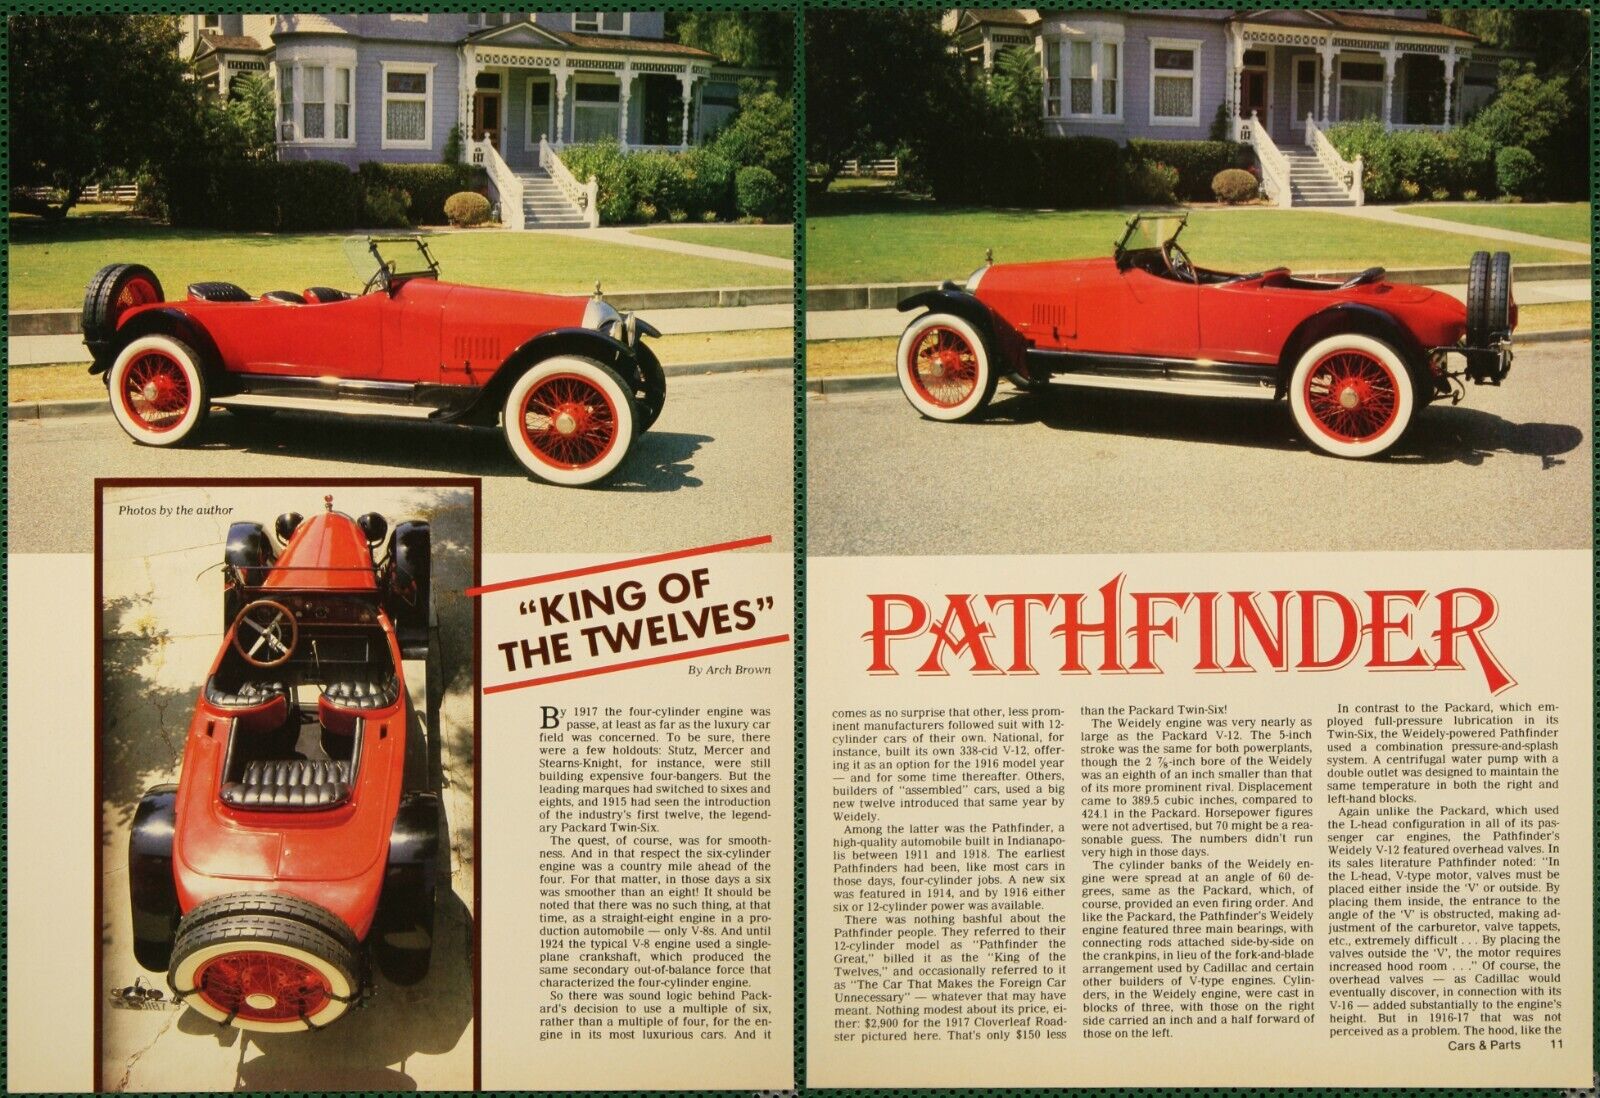 Pathfinder 1917 12 Cylinder Auto Features Vintage Pictorial Article 1985